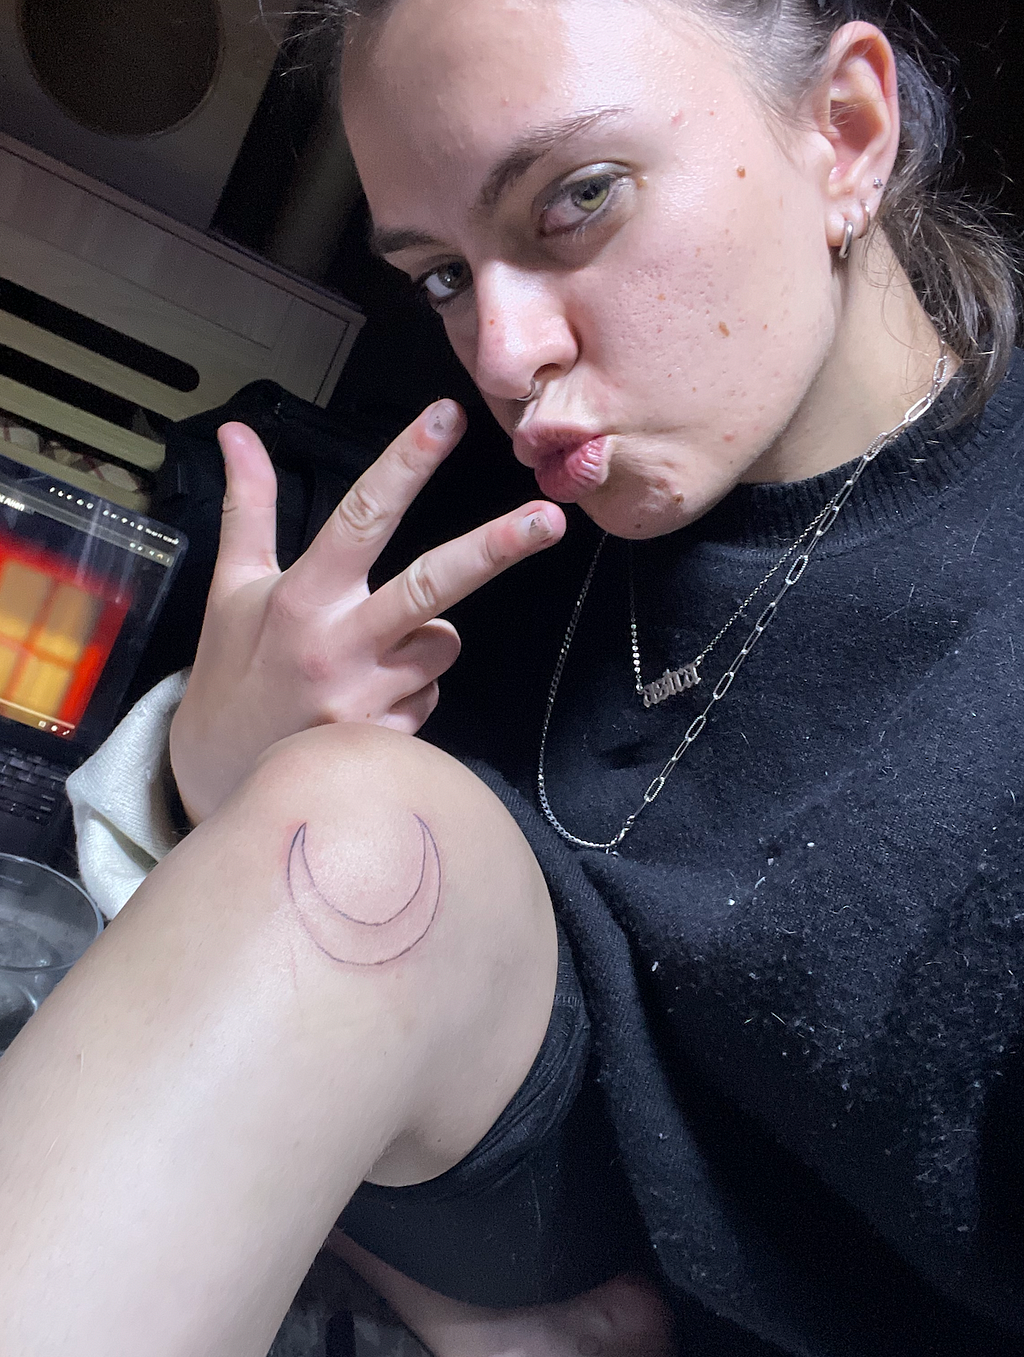 Me with my new stick and poke tattoo, which is a cresent moon that wraps around the bottom of my knee. I’m throwing up a peace sign and doing a duck face.